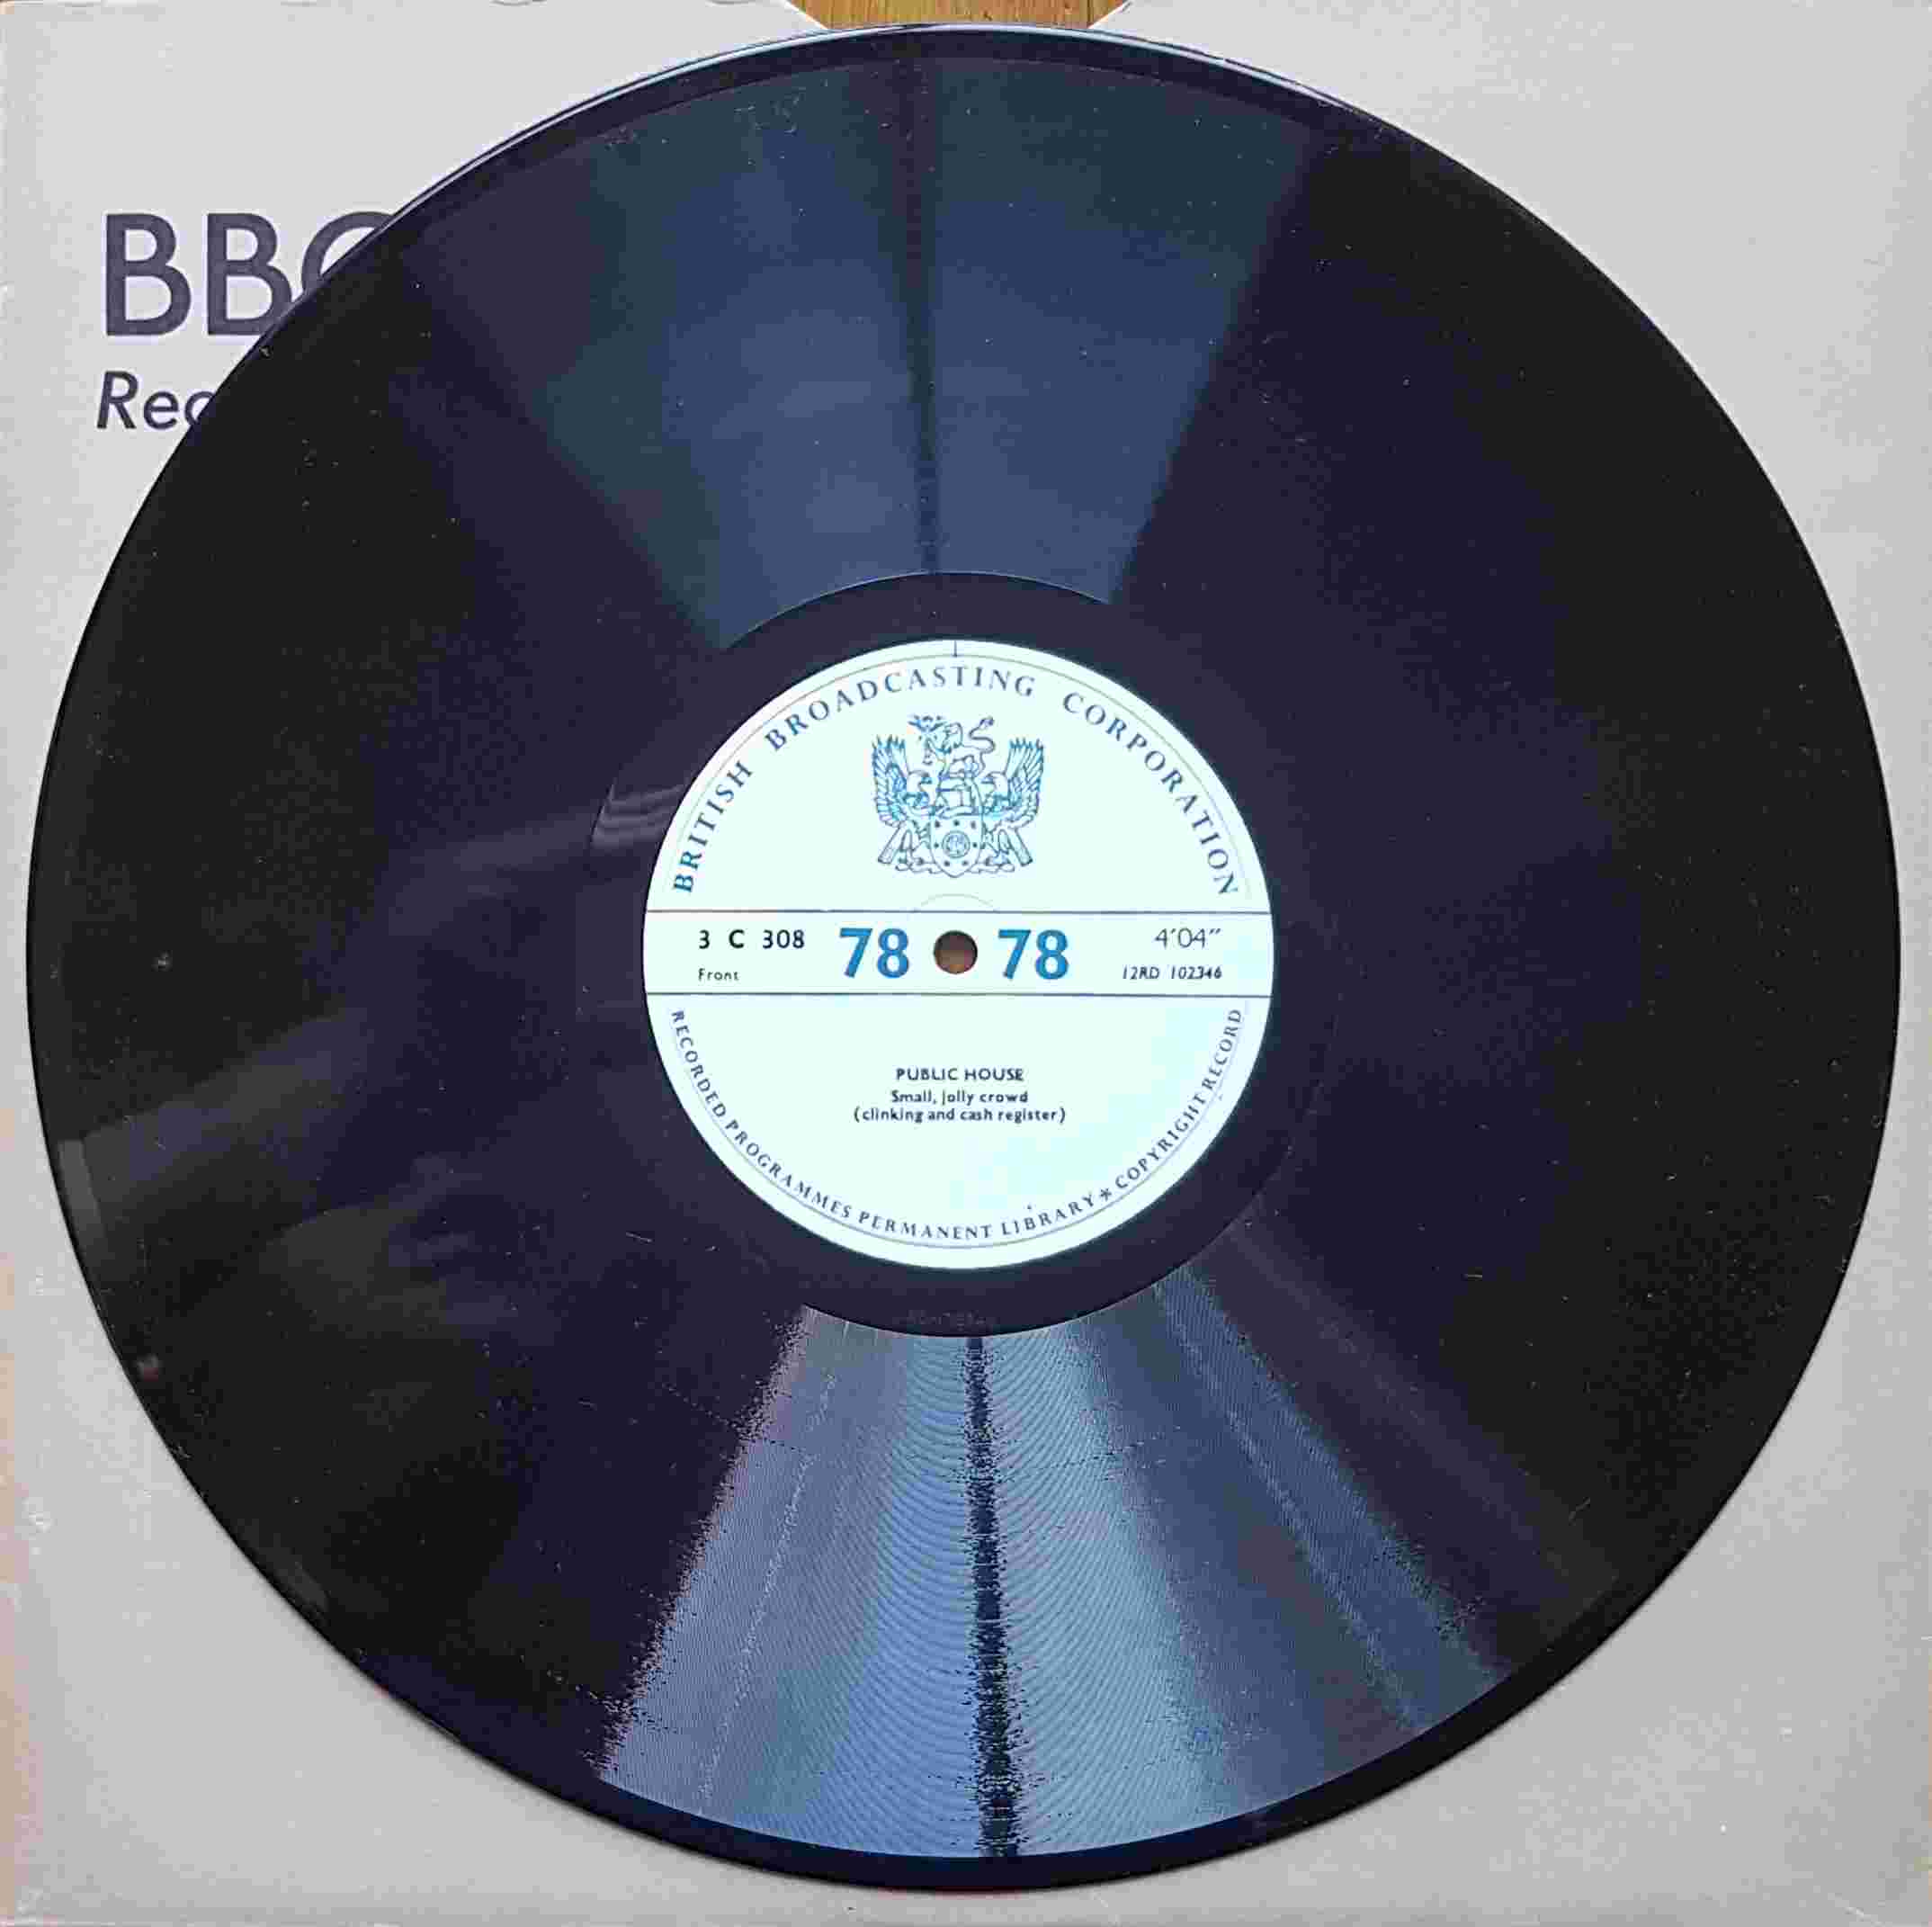 Picture of 3 C 308 Public house by artist Not registered from the BBC 78 - Records and Tapes library